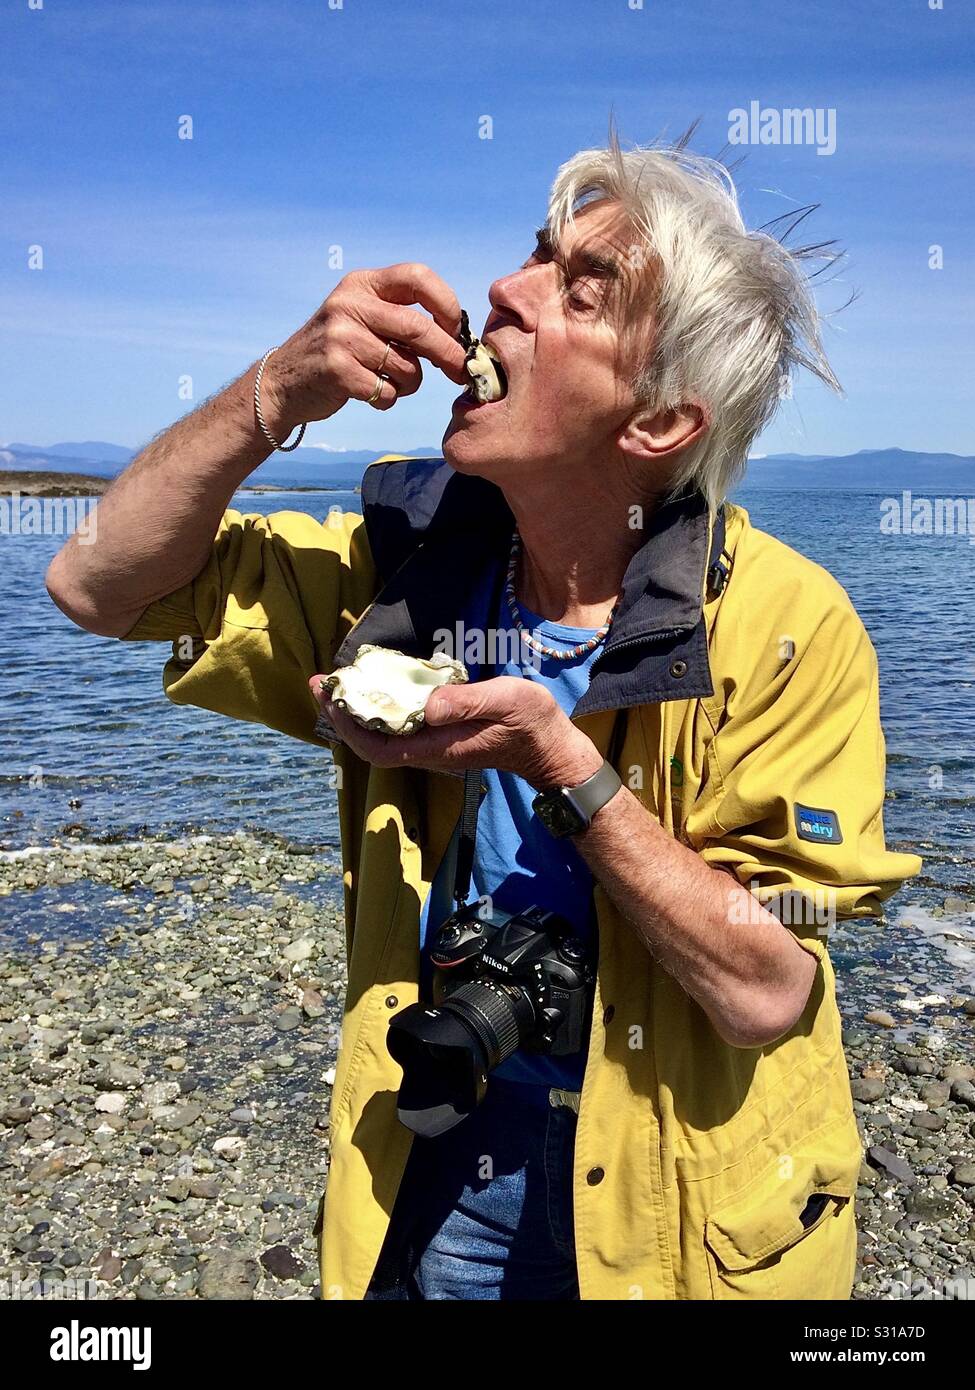 Swallowing a wild oyster on a Canadian Pacific shore. Stock Photo